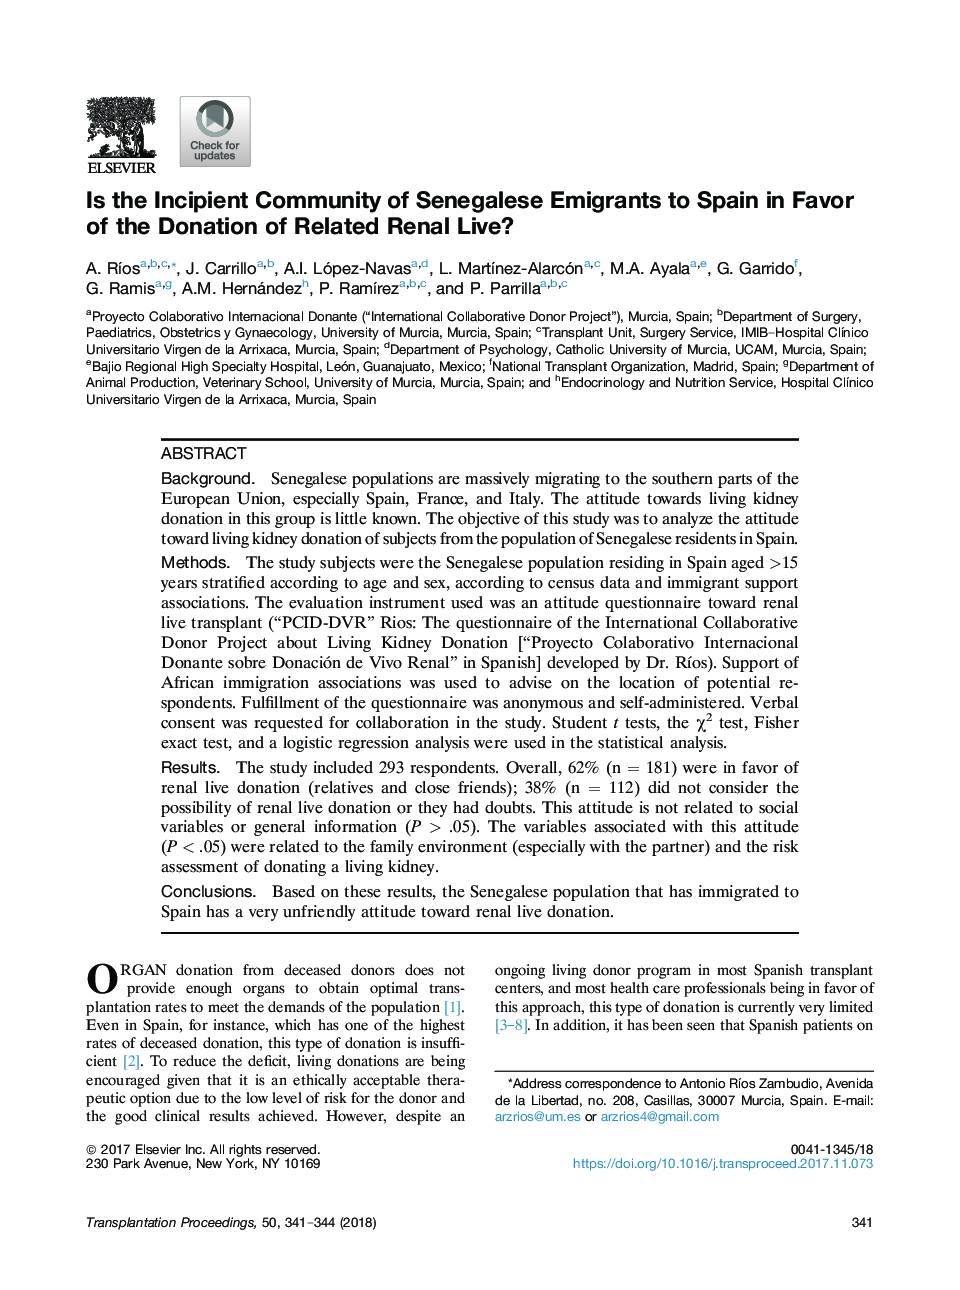 Is the Incipient Community of Senegalese Emigrants to Spain in Favor of the Donation of Related Renal Live?